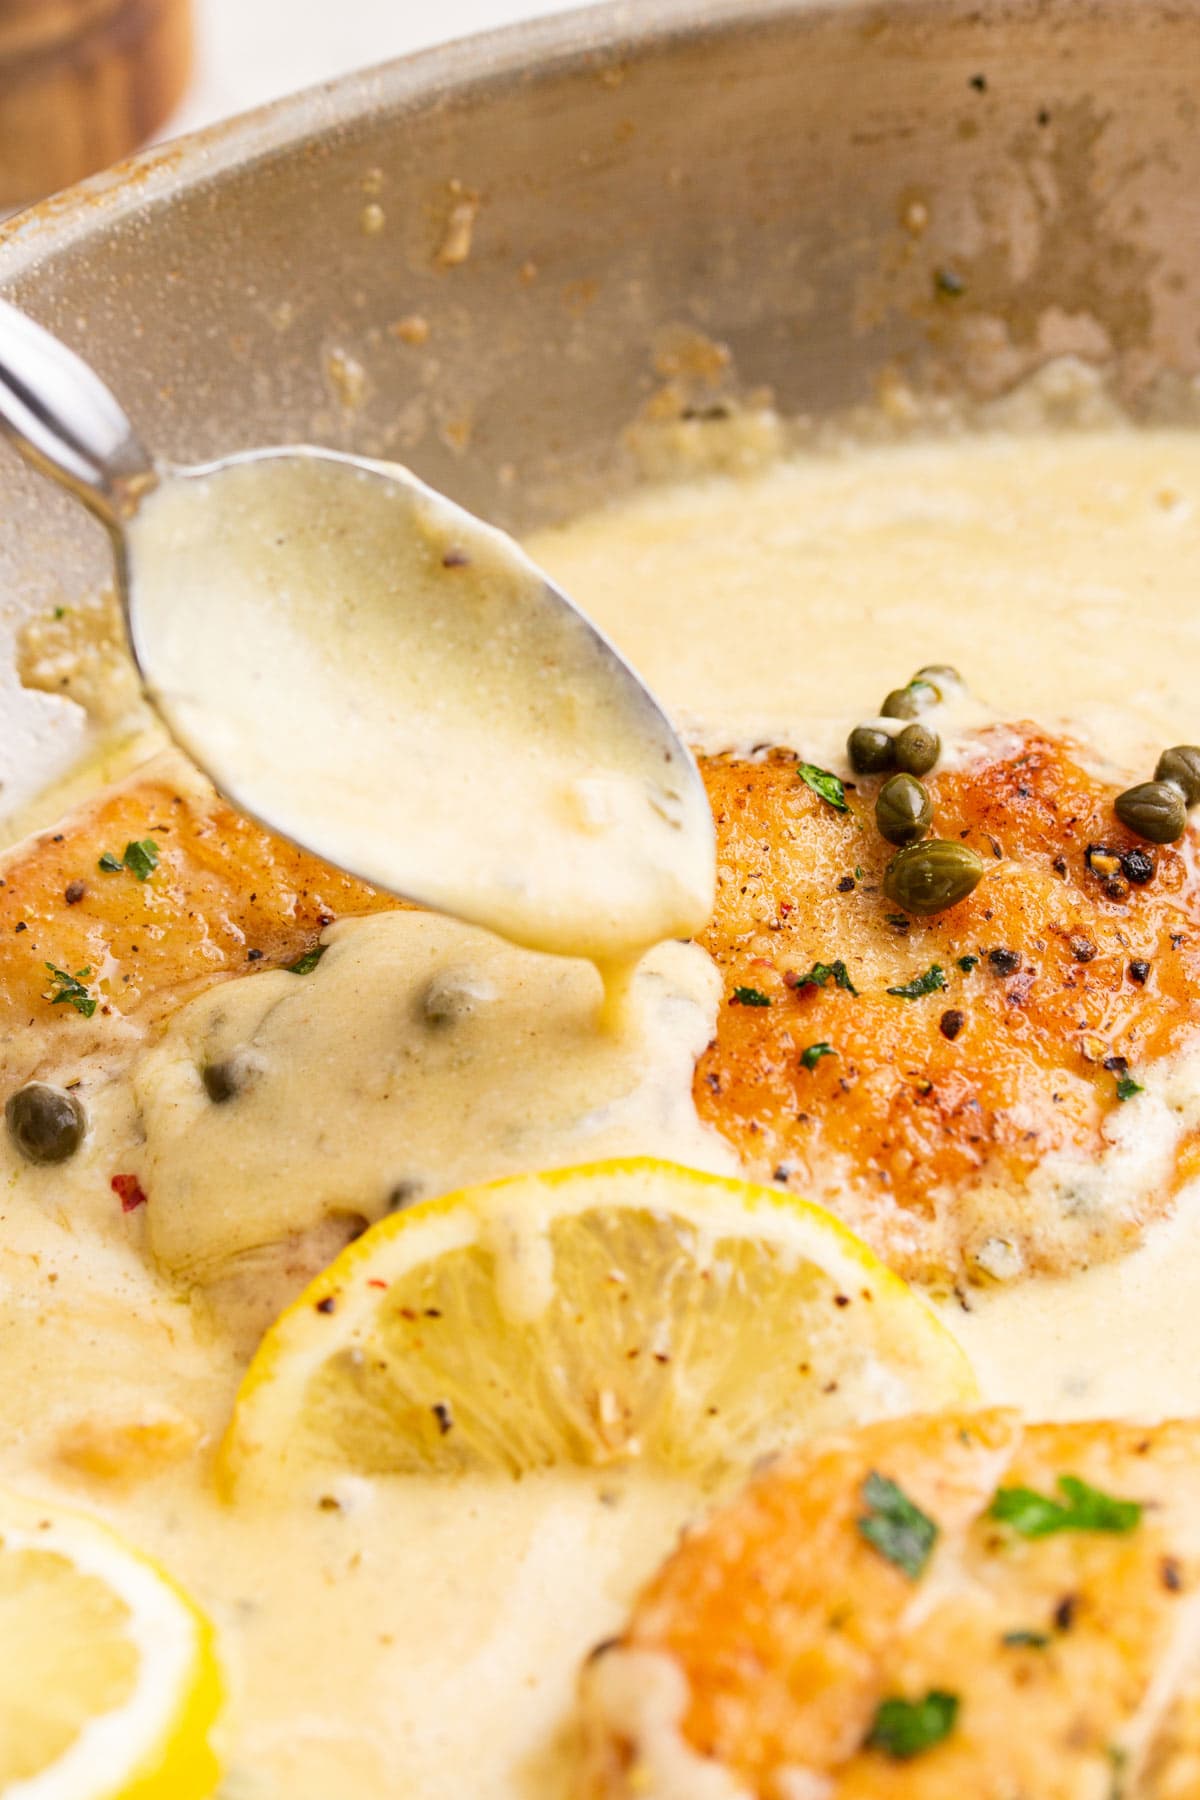 Some cream sauce spooned over the lightly battered creamy lemon chicken piccata.